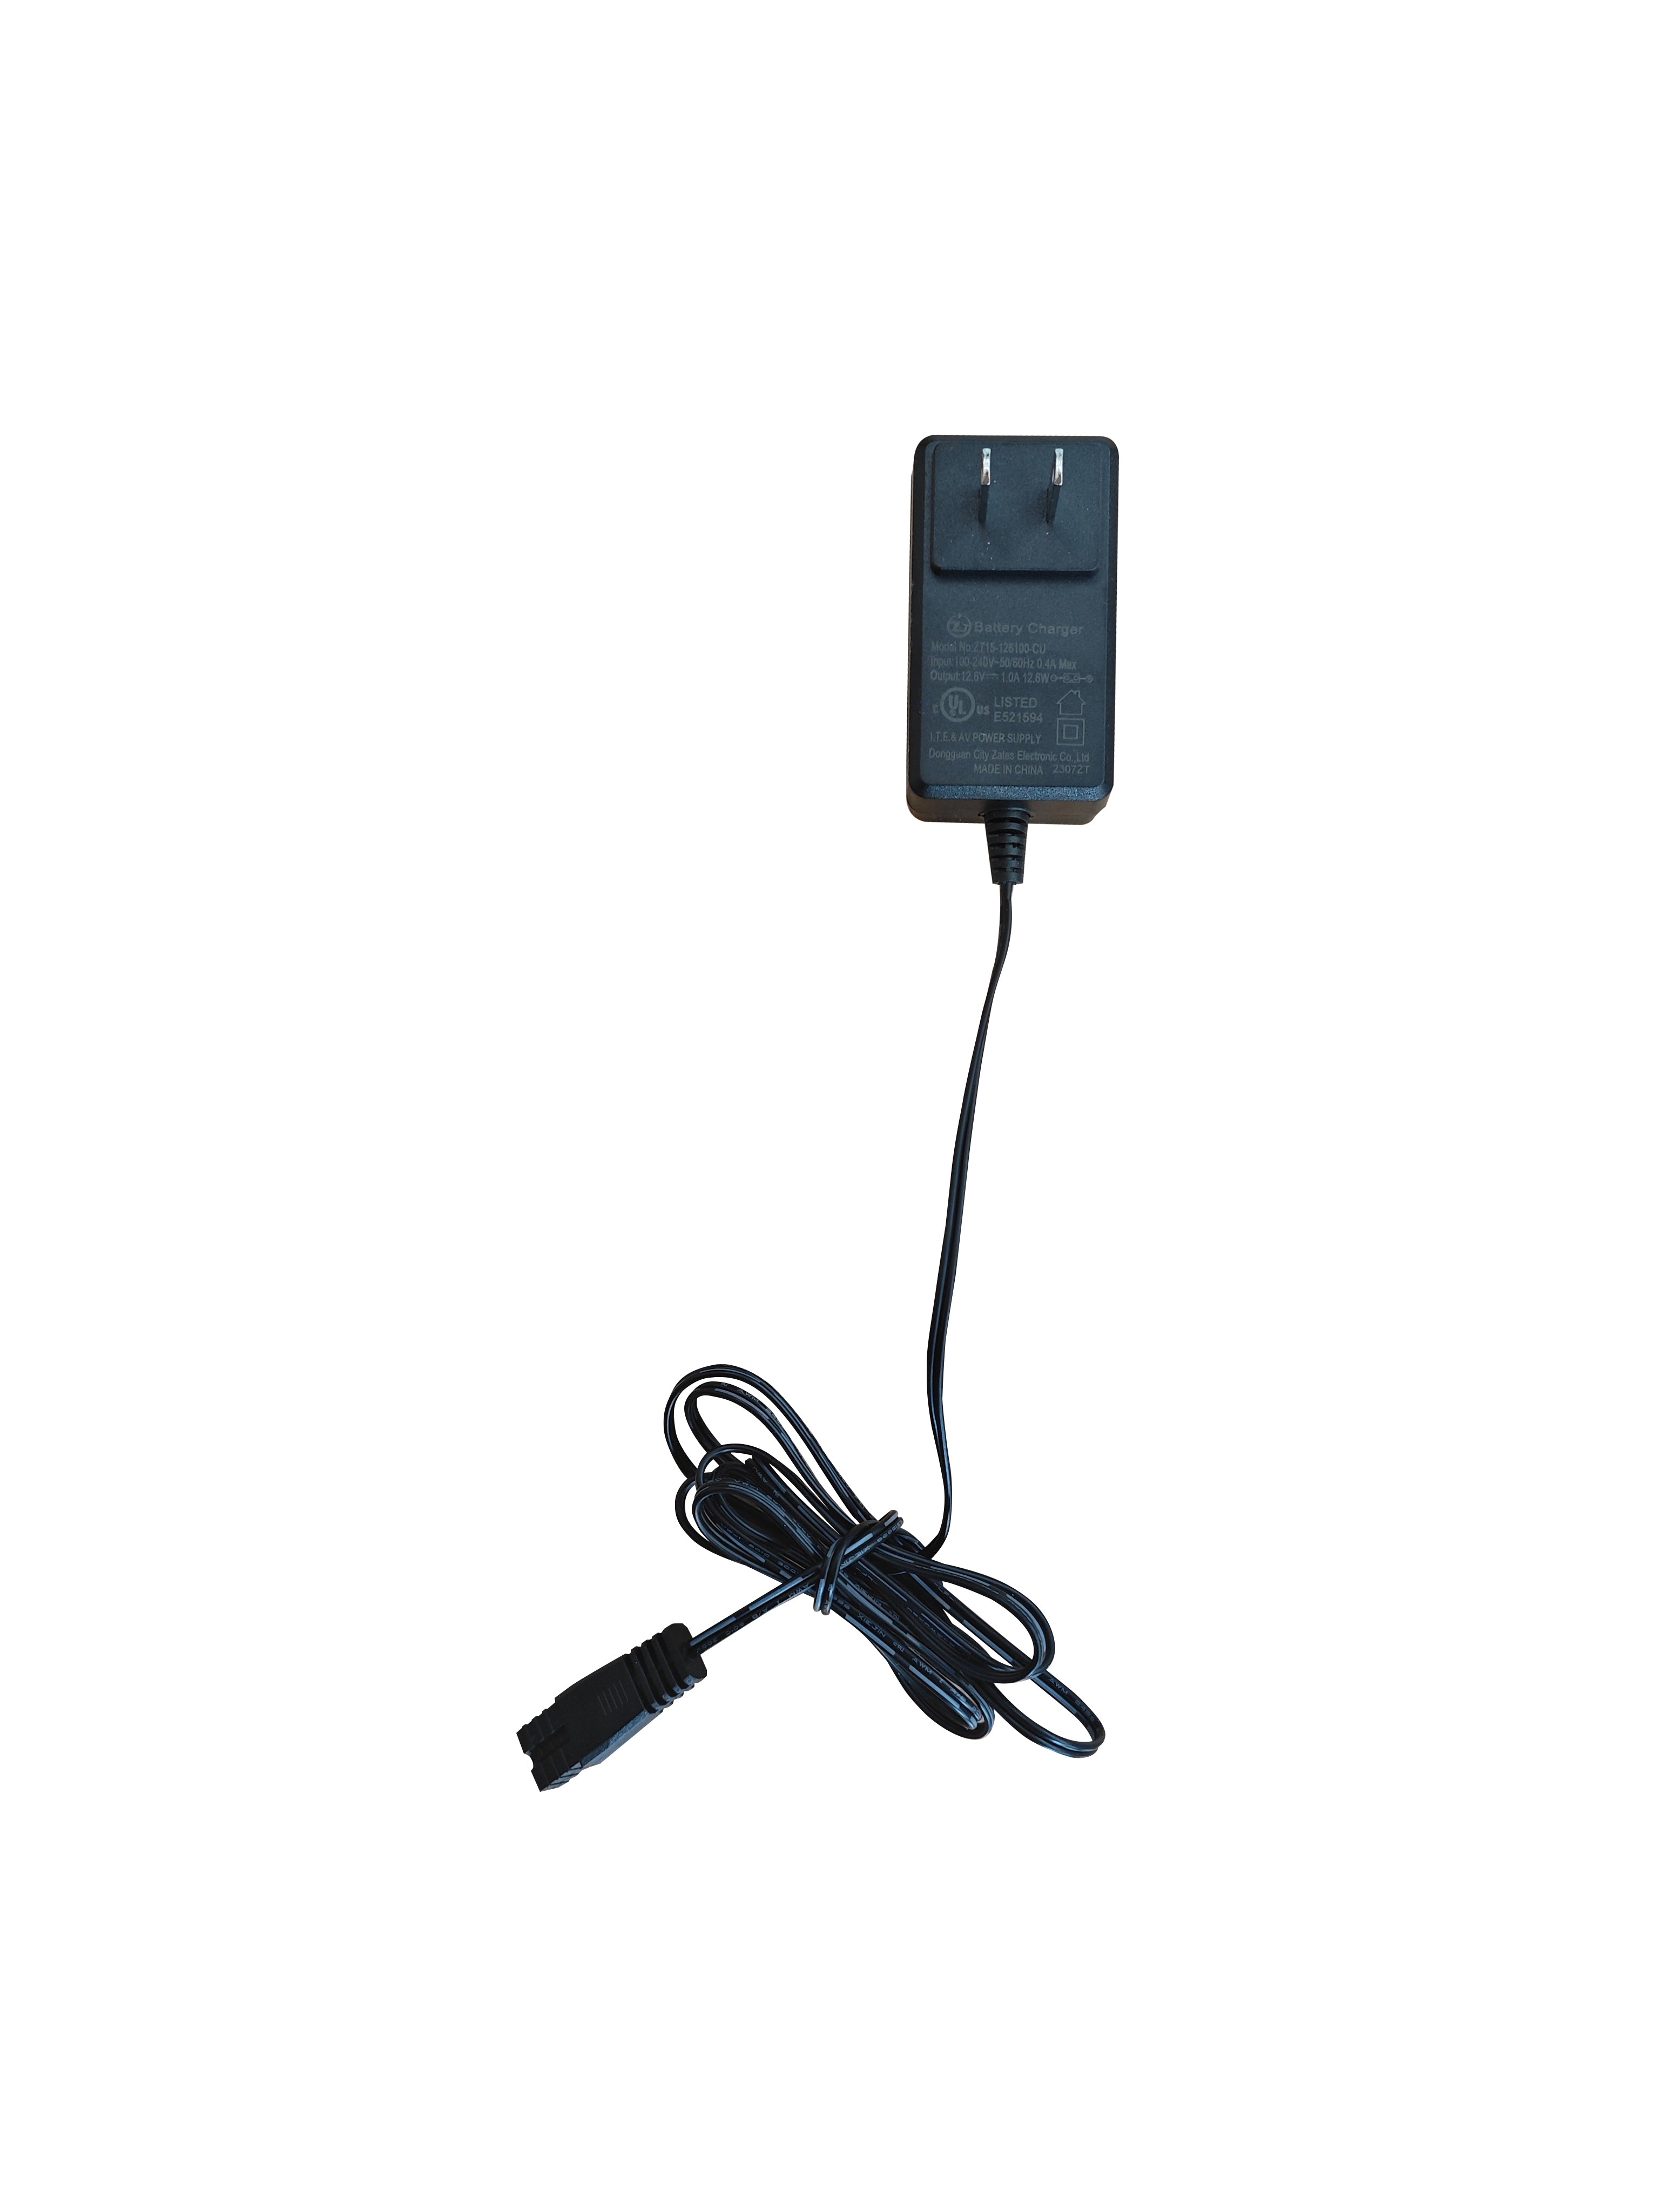 Pool Vacuum Accessories - Battery Charger